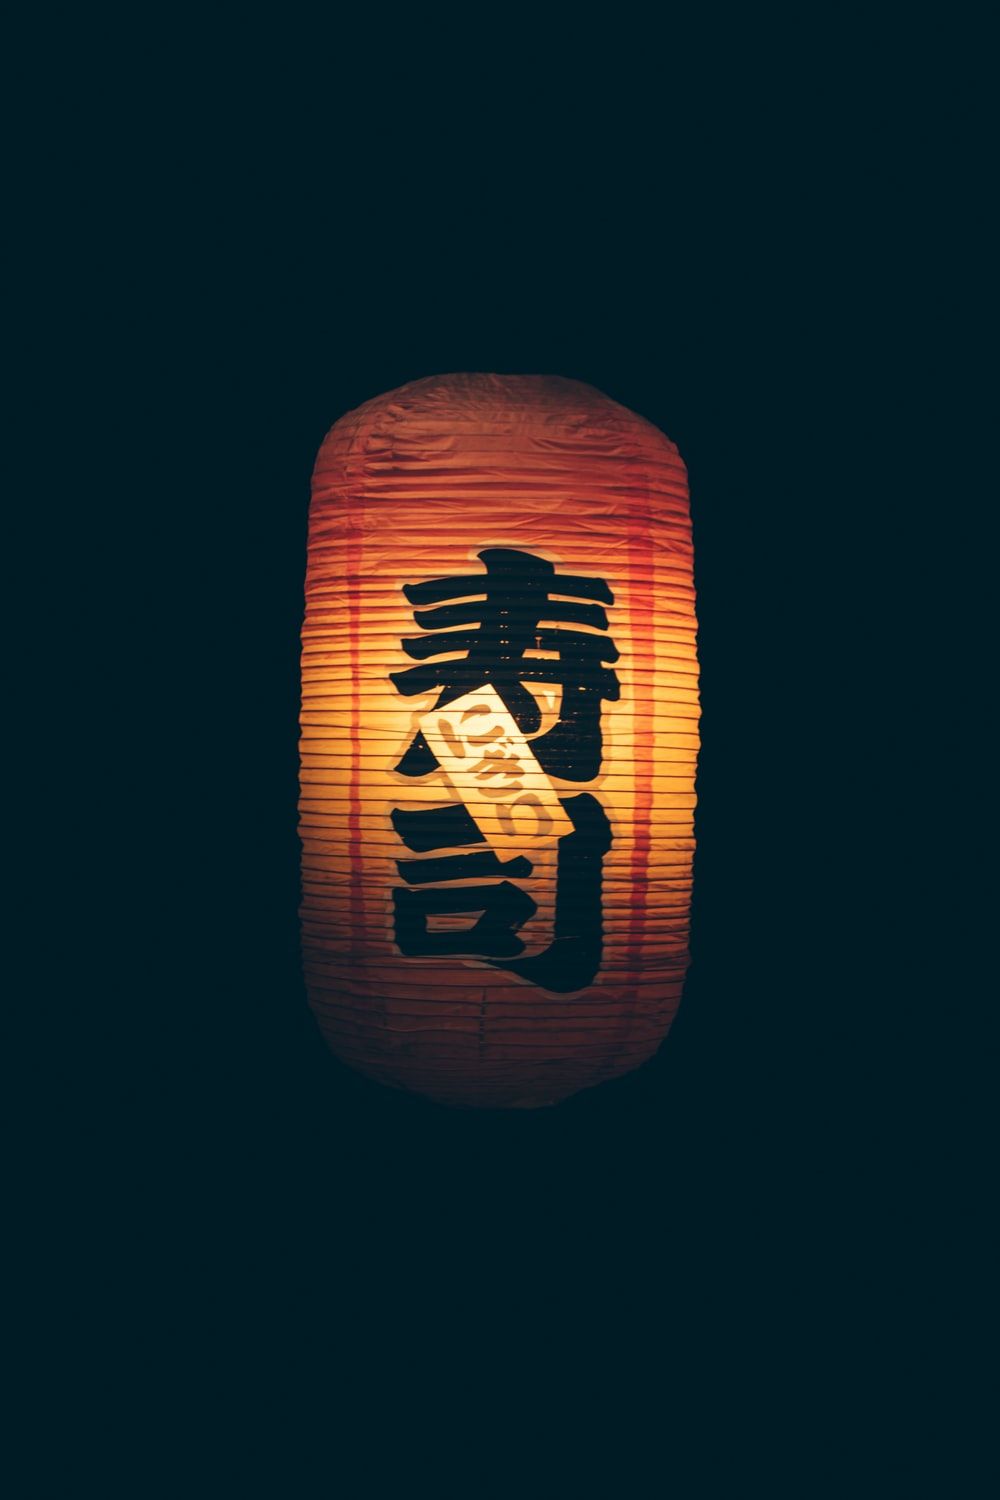 Chinese Writing Picture. Download Free Image